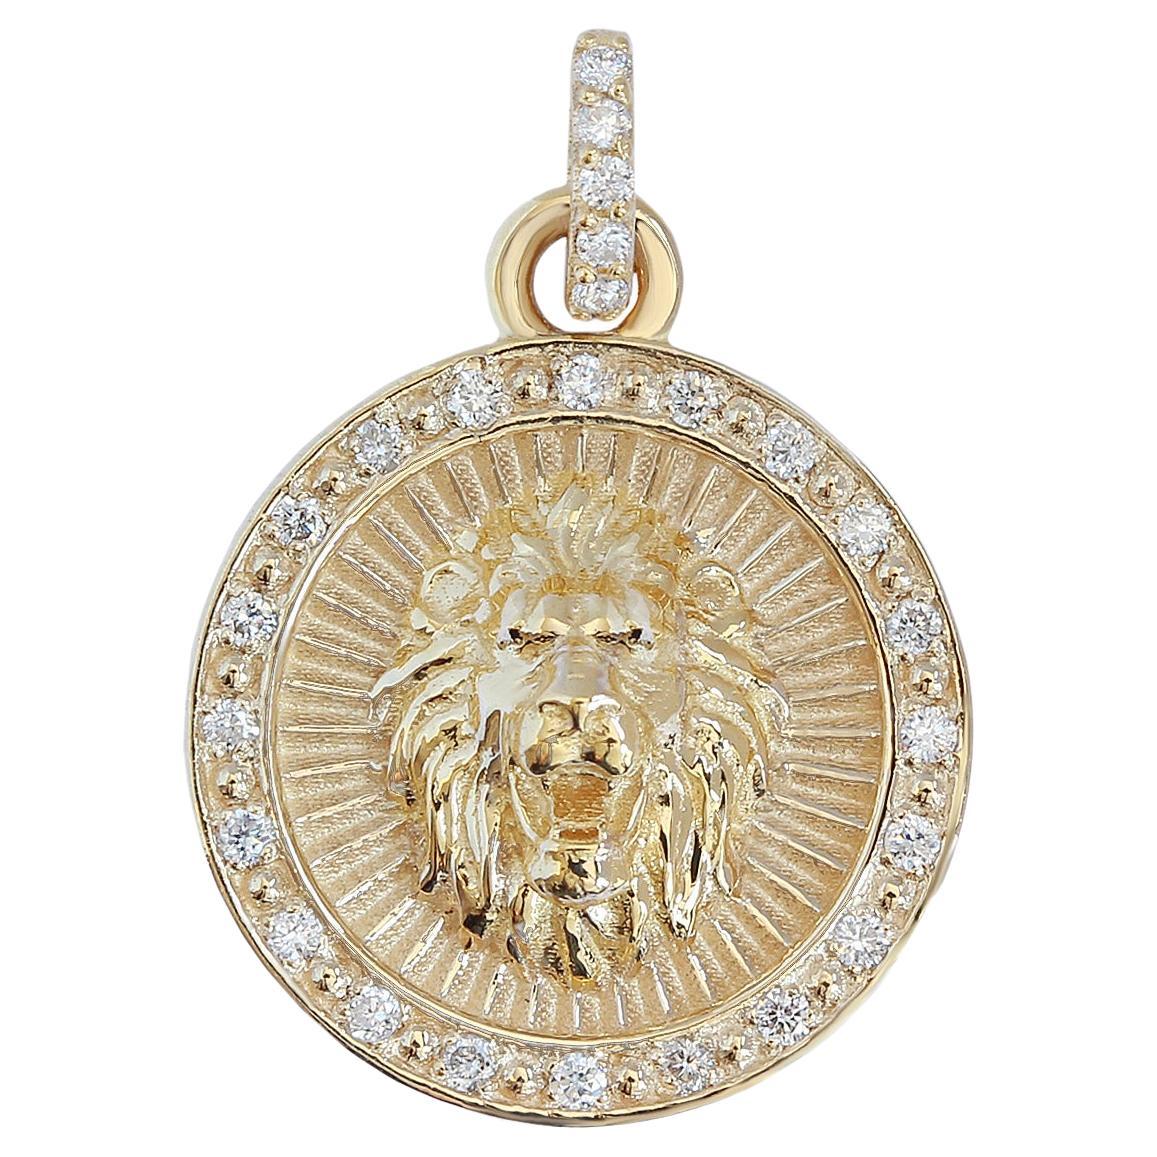 Gold Lion Astrology Symbol Coin Pendant Necklace - 14K Yellow Gold For Sale